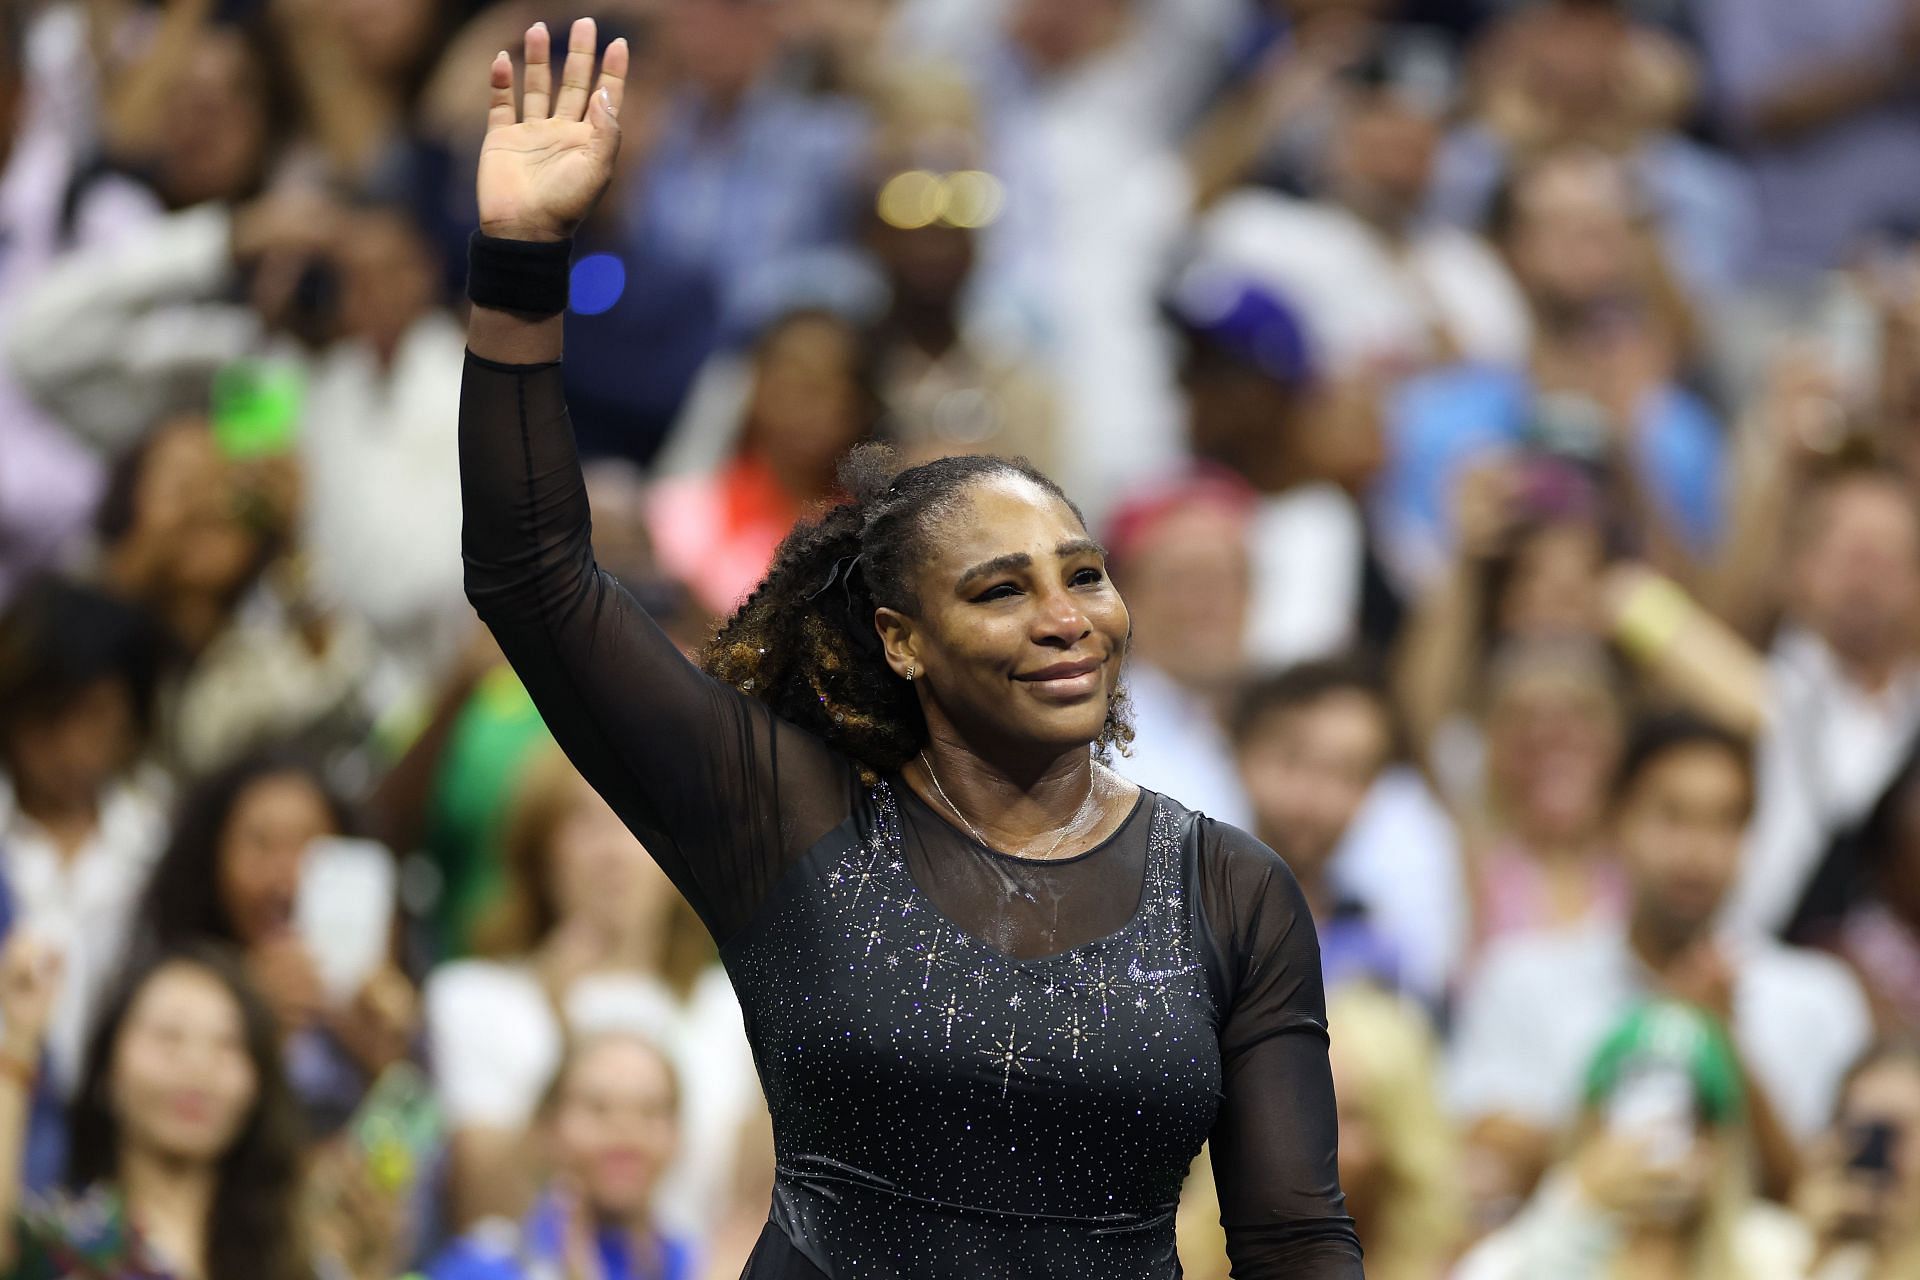 Serena Williams thanks the fans following her defeat to Ajla Tomlijanovic at the 2022 US Open.